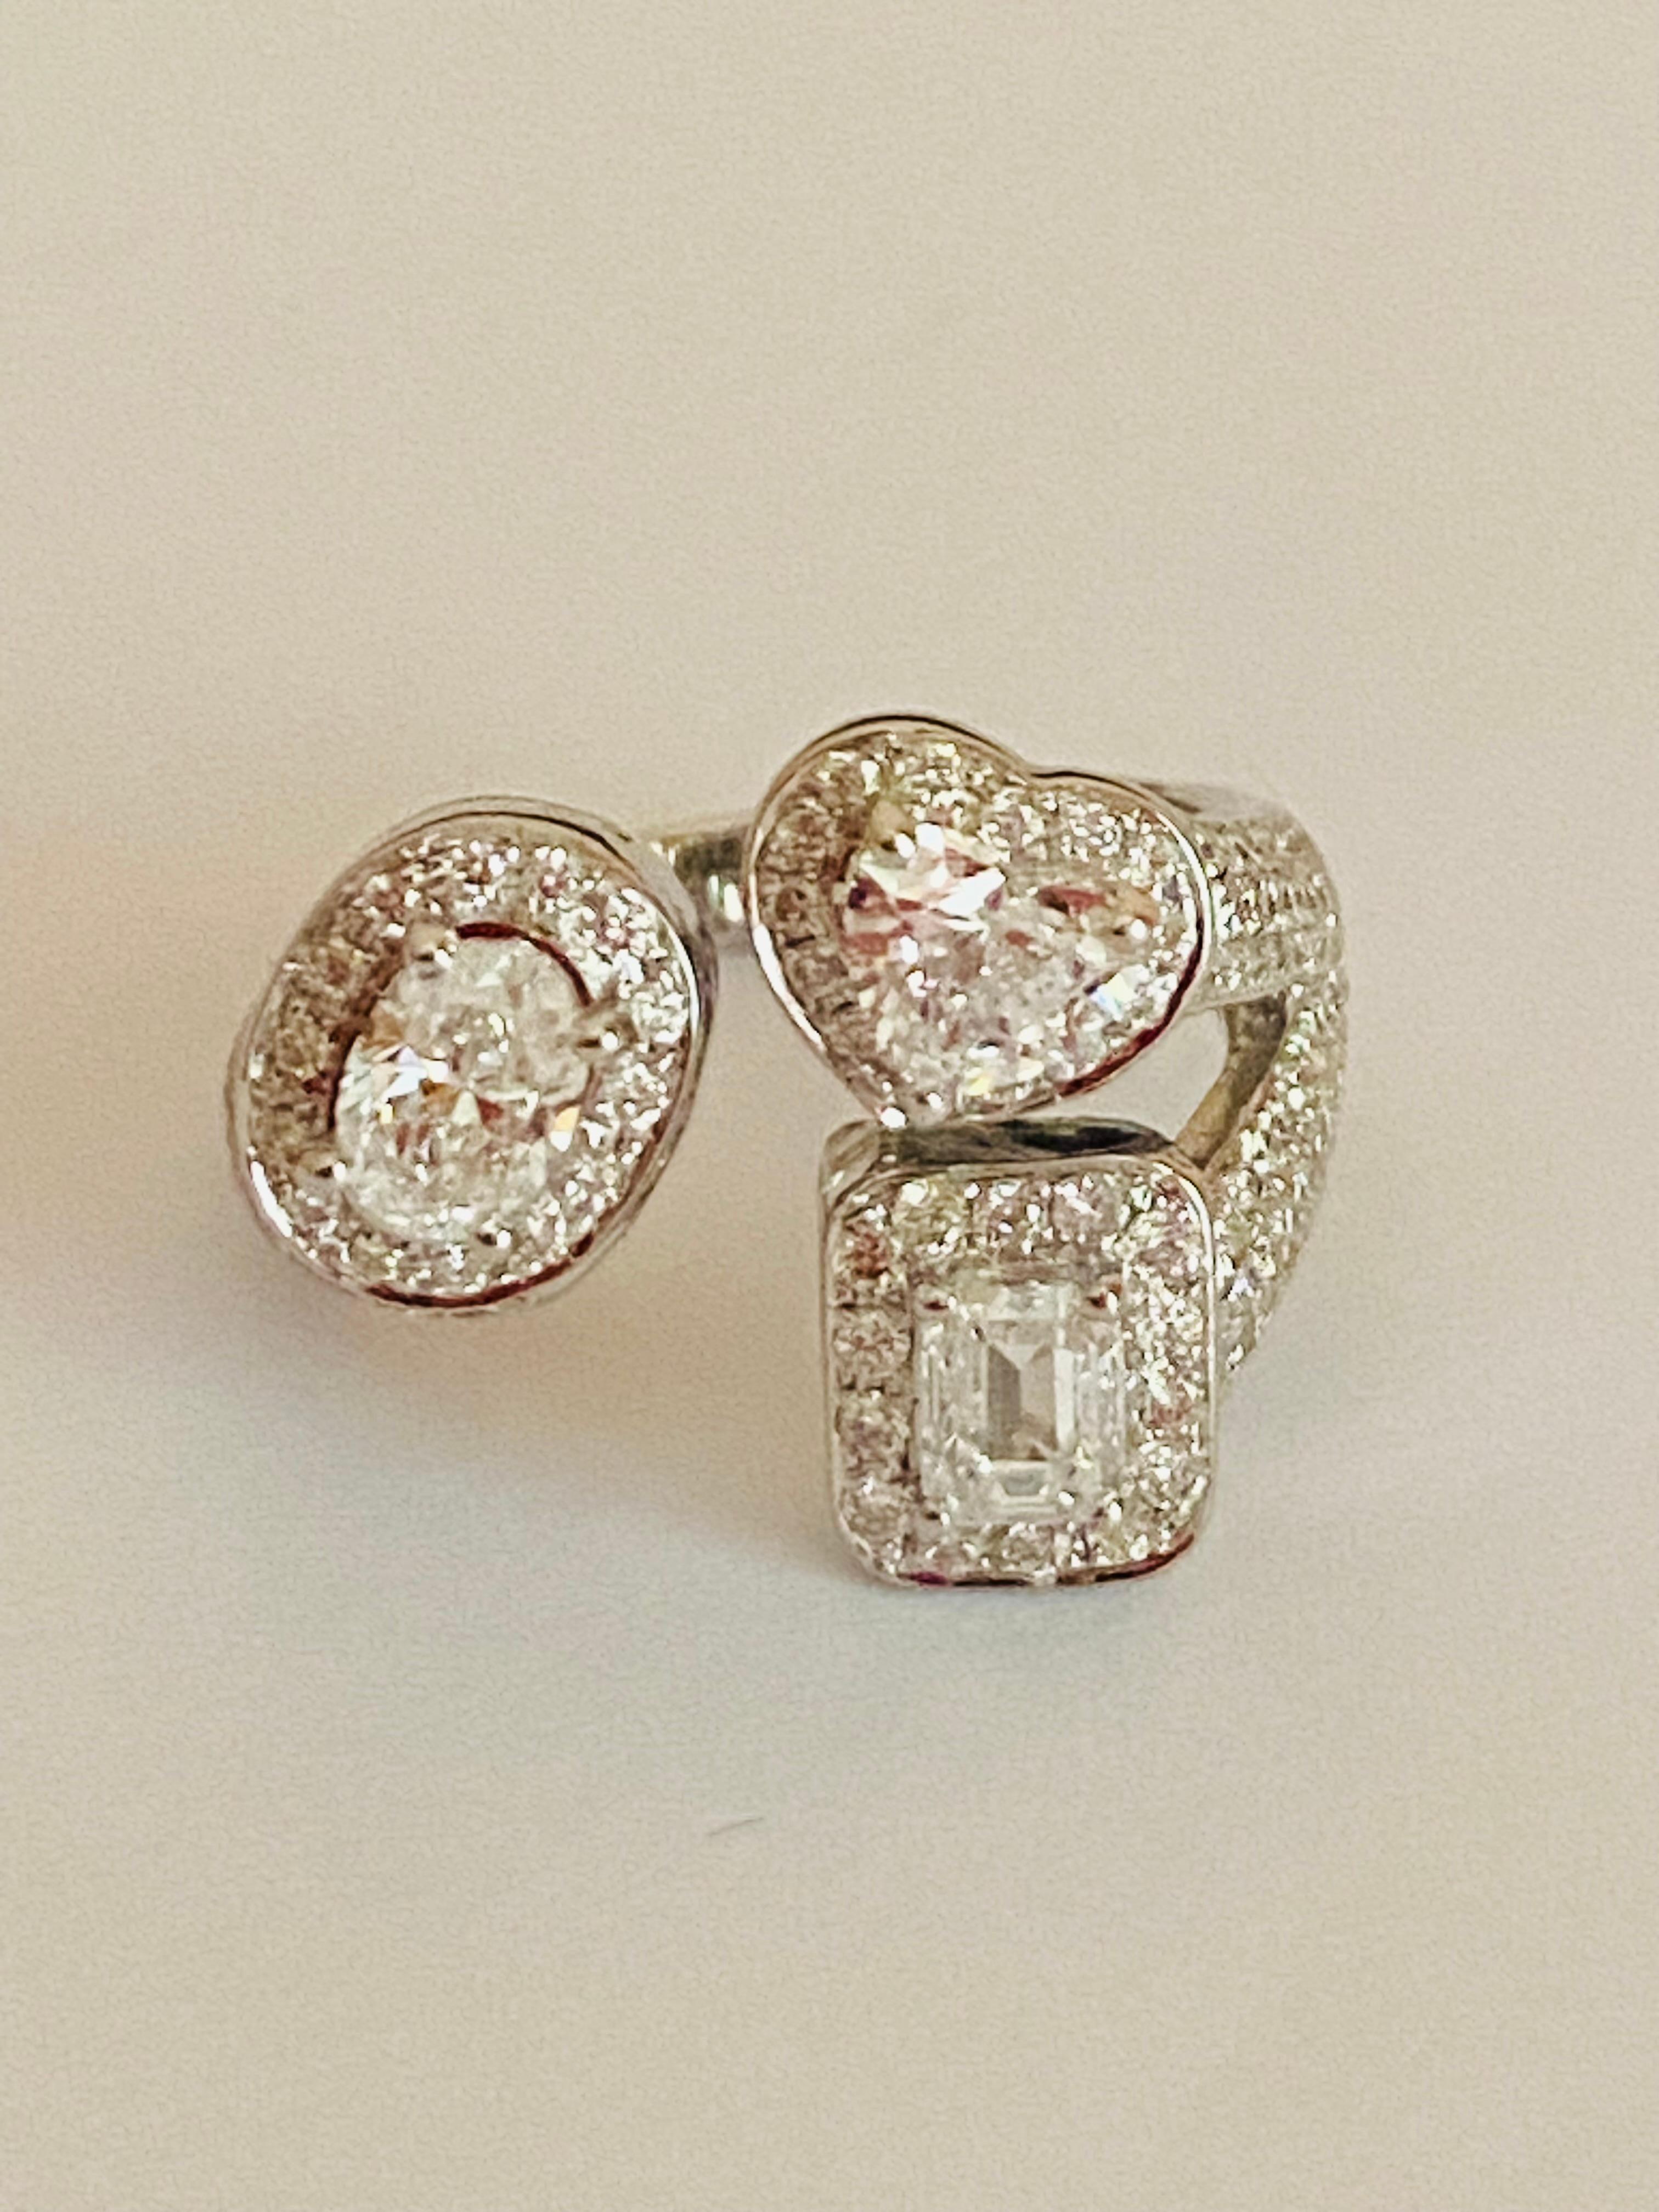 An amazing modern design from contemporary collection, so stunning, ideal for all events, so sophisticated and elegant, by Italian designer.
Ring come in 18K gold with 3 pieces of GIA certified Natural Diamonds, in special cut. One piece is in